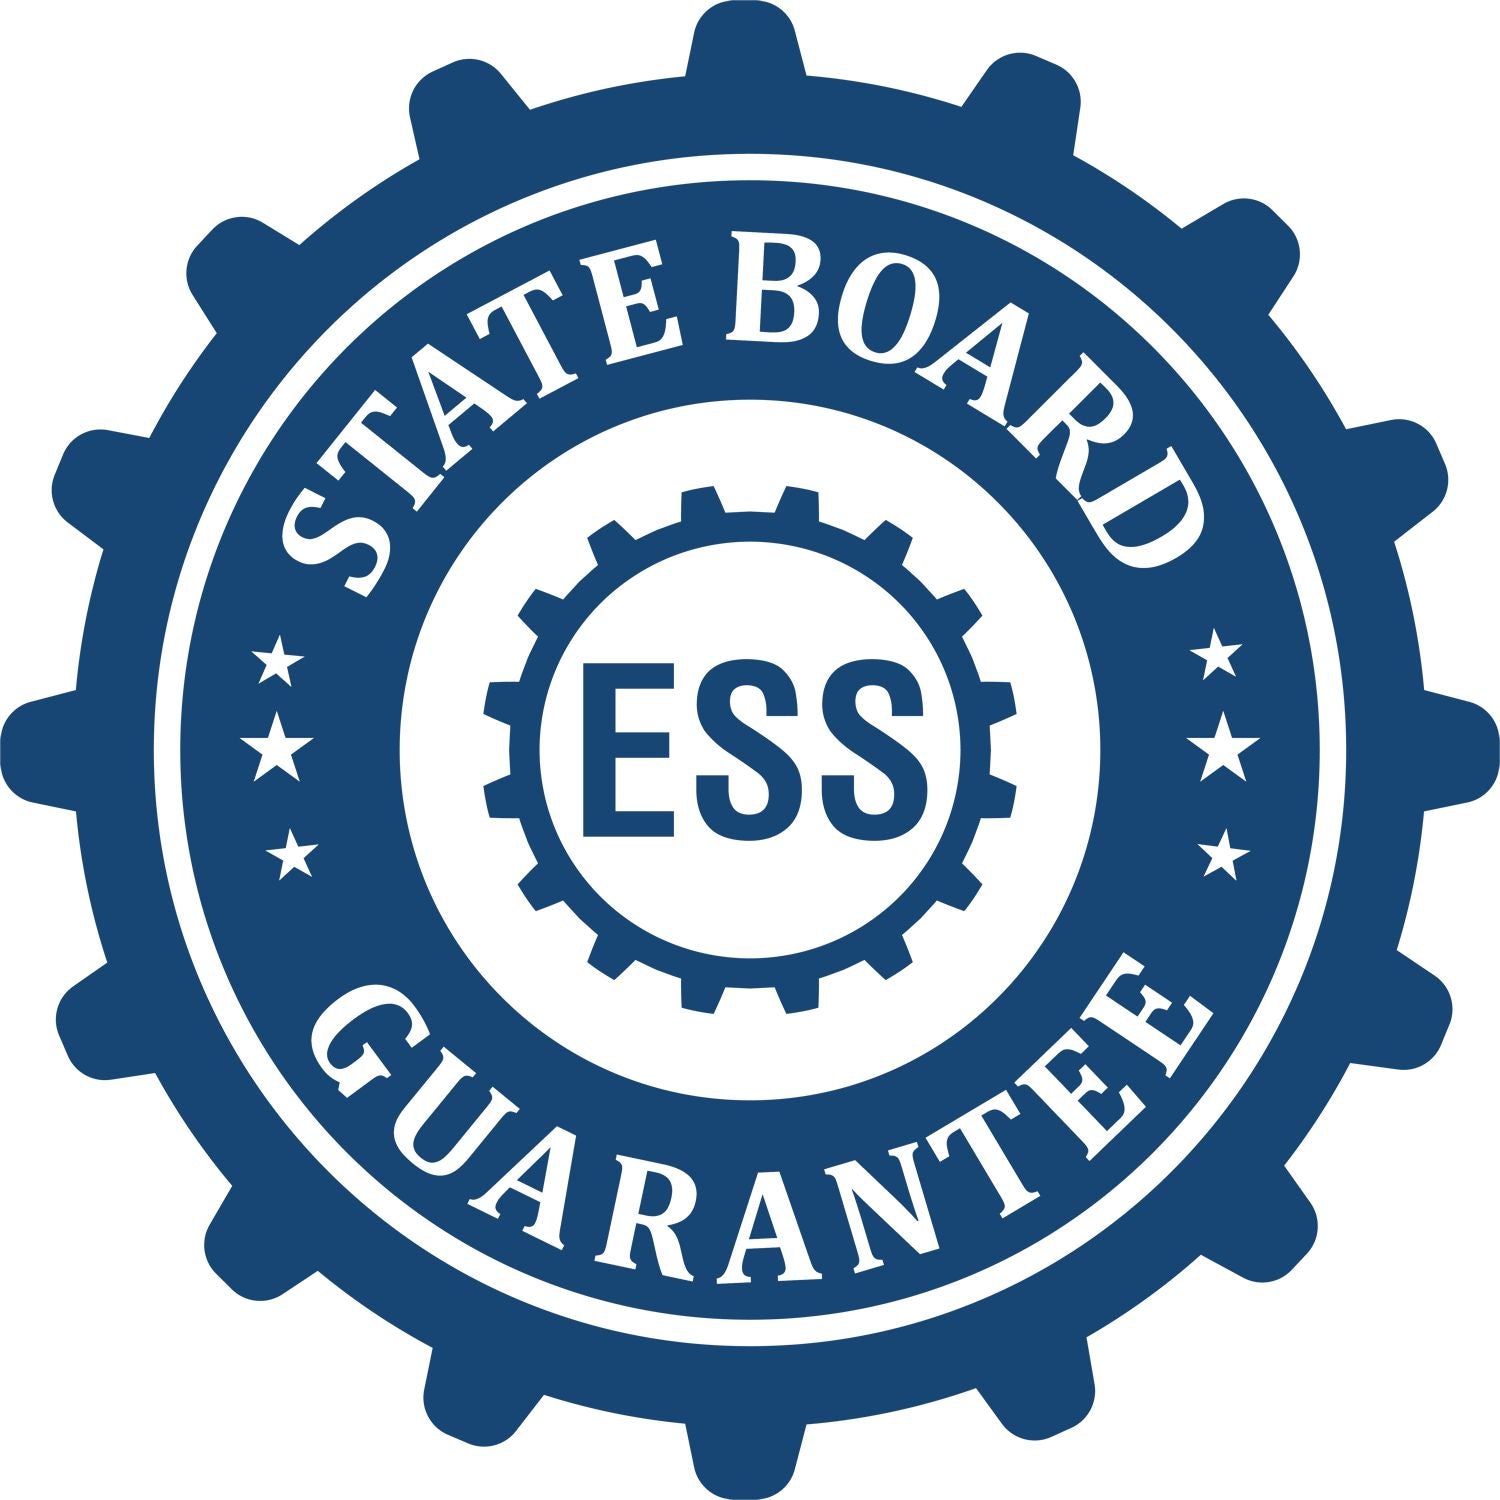 An emblem in a gear shape illustrating a state board guarantee for the New York Landscape Architectural Seal Stamp product.